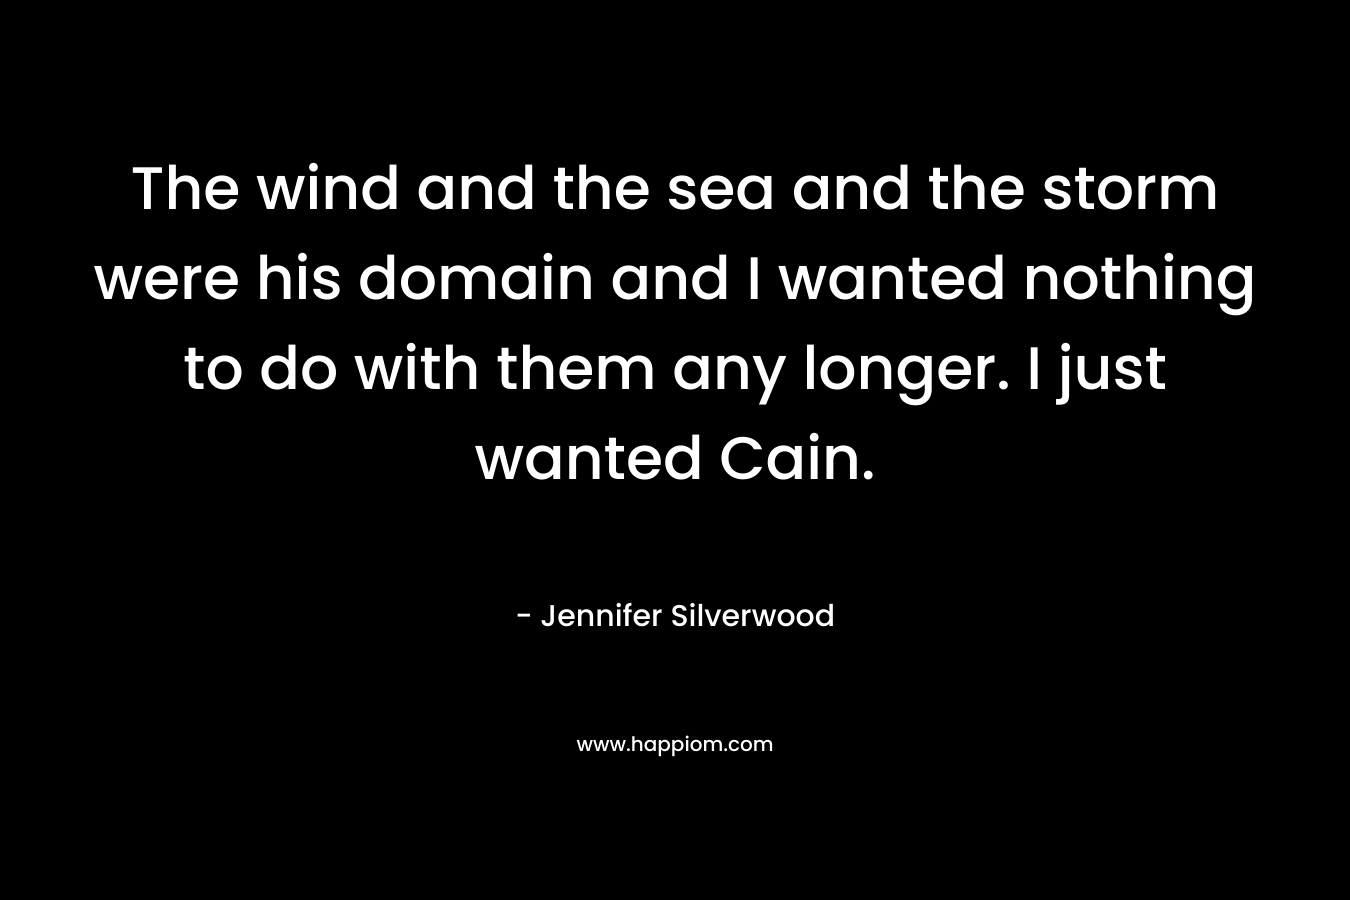 The wind and the sea and the storm were his domain and I wanted nothing to do with them any longer. I just wanted Cain. – Jennifer Silverwood